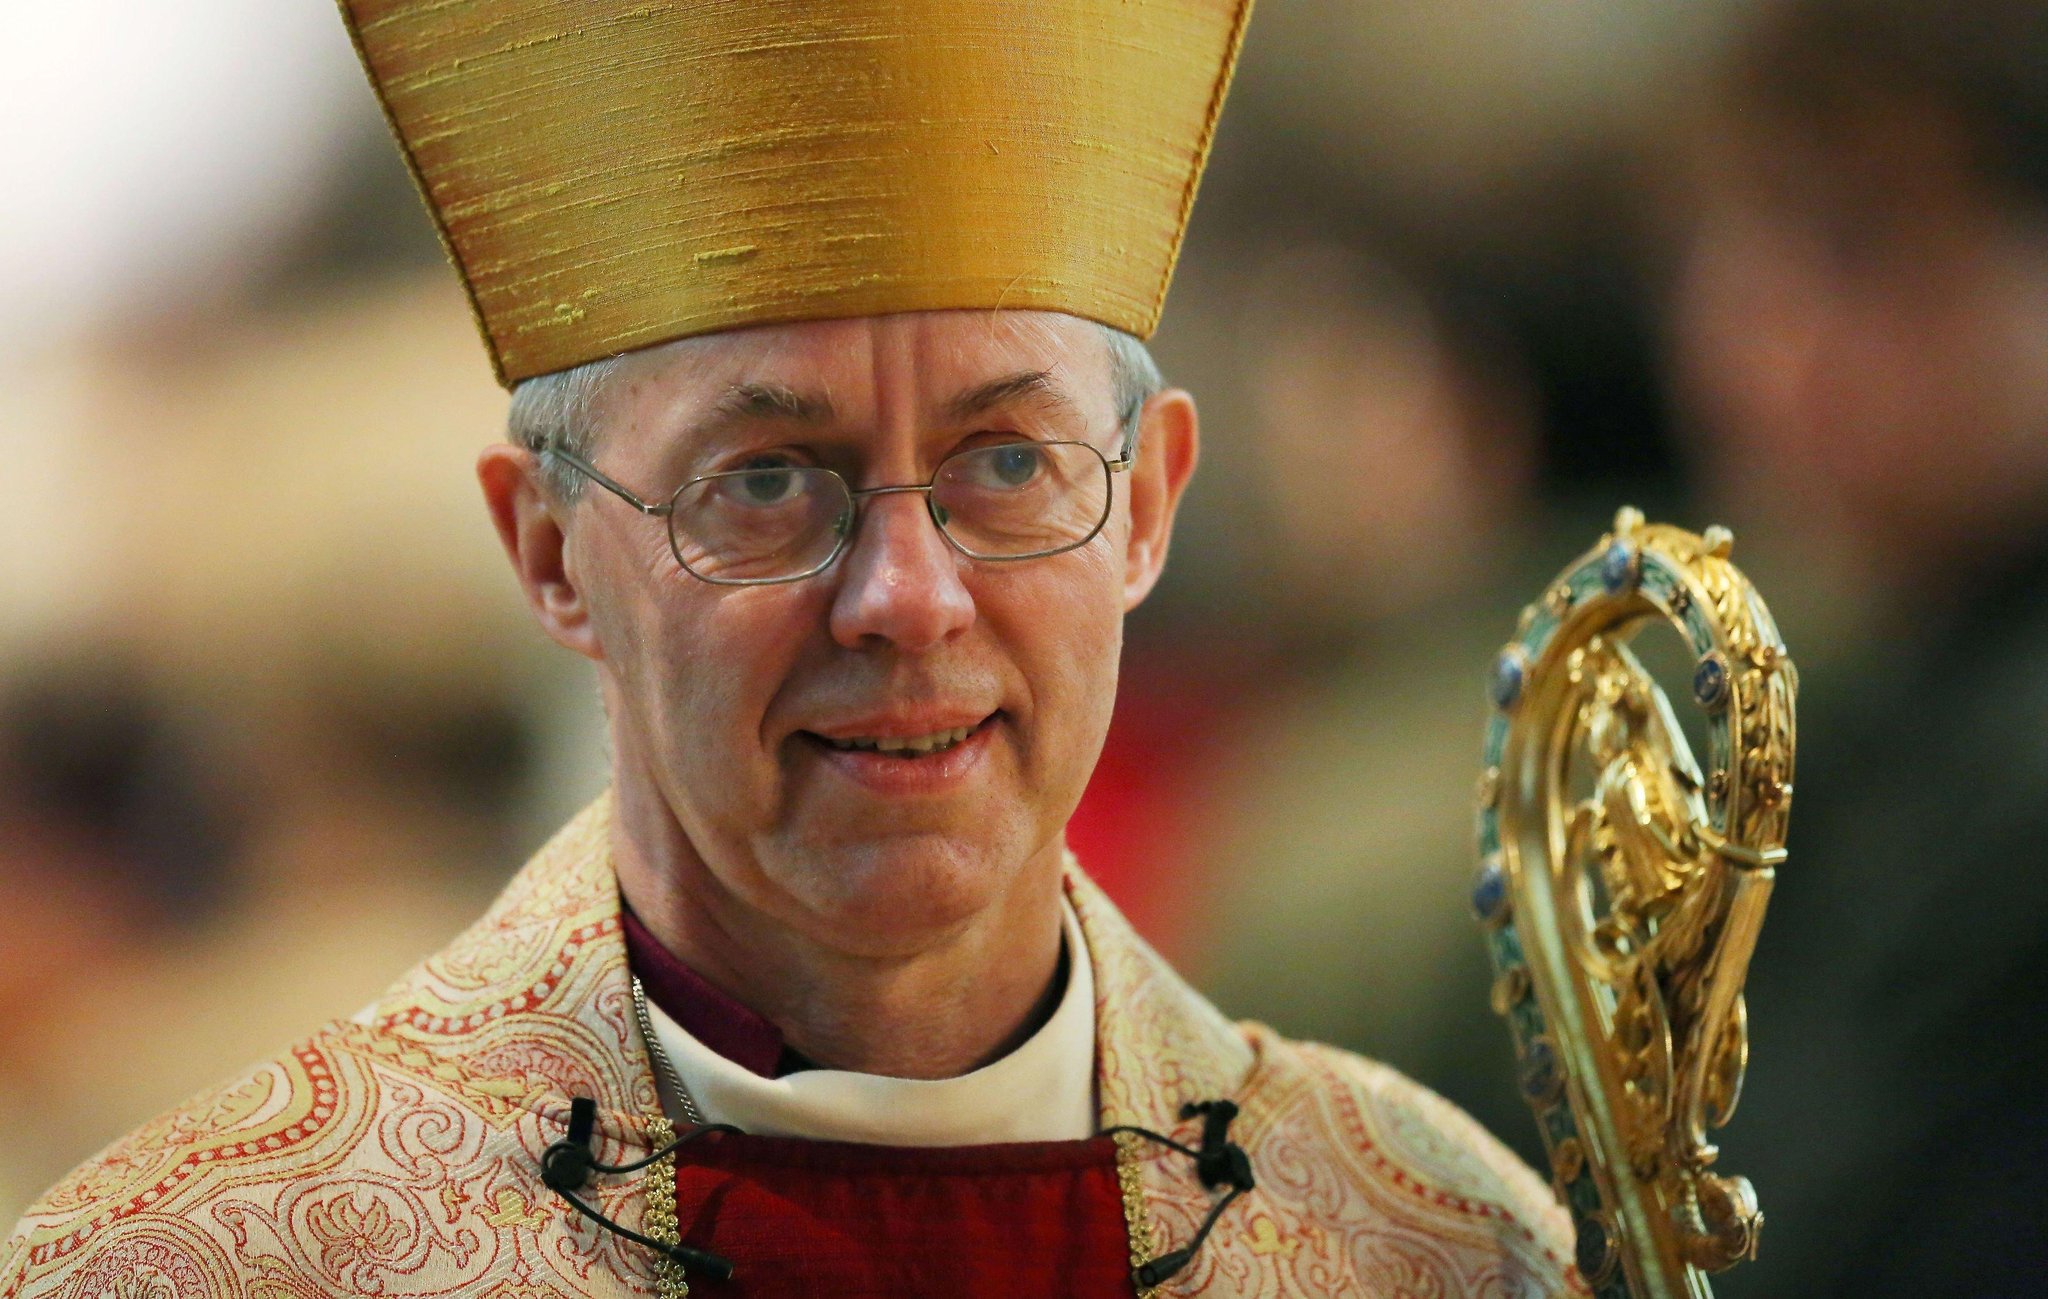 Archbishop Welby under fire over his 'political' sermon